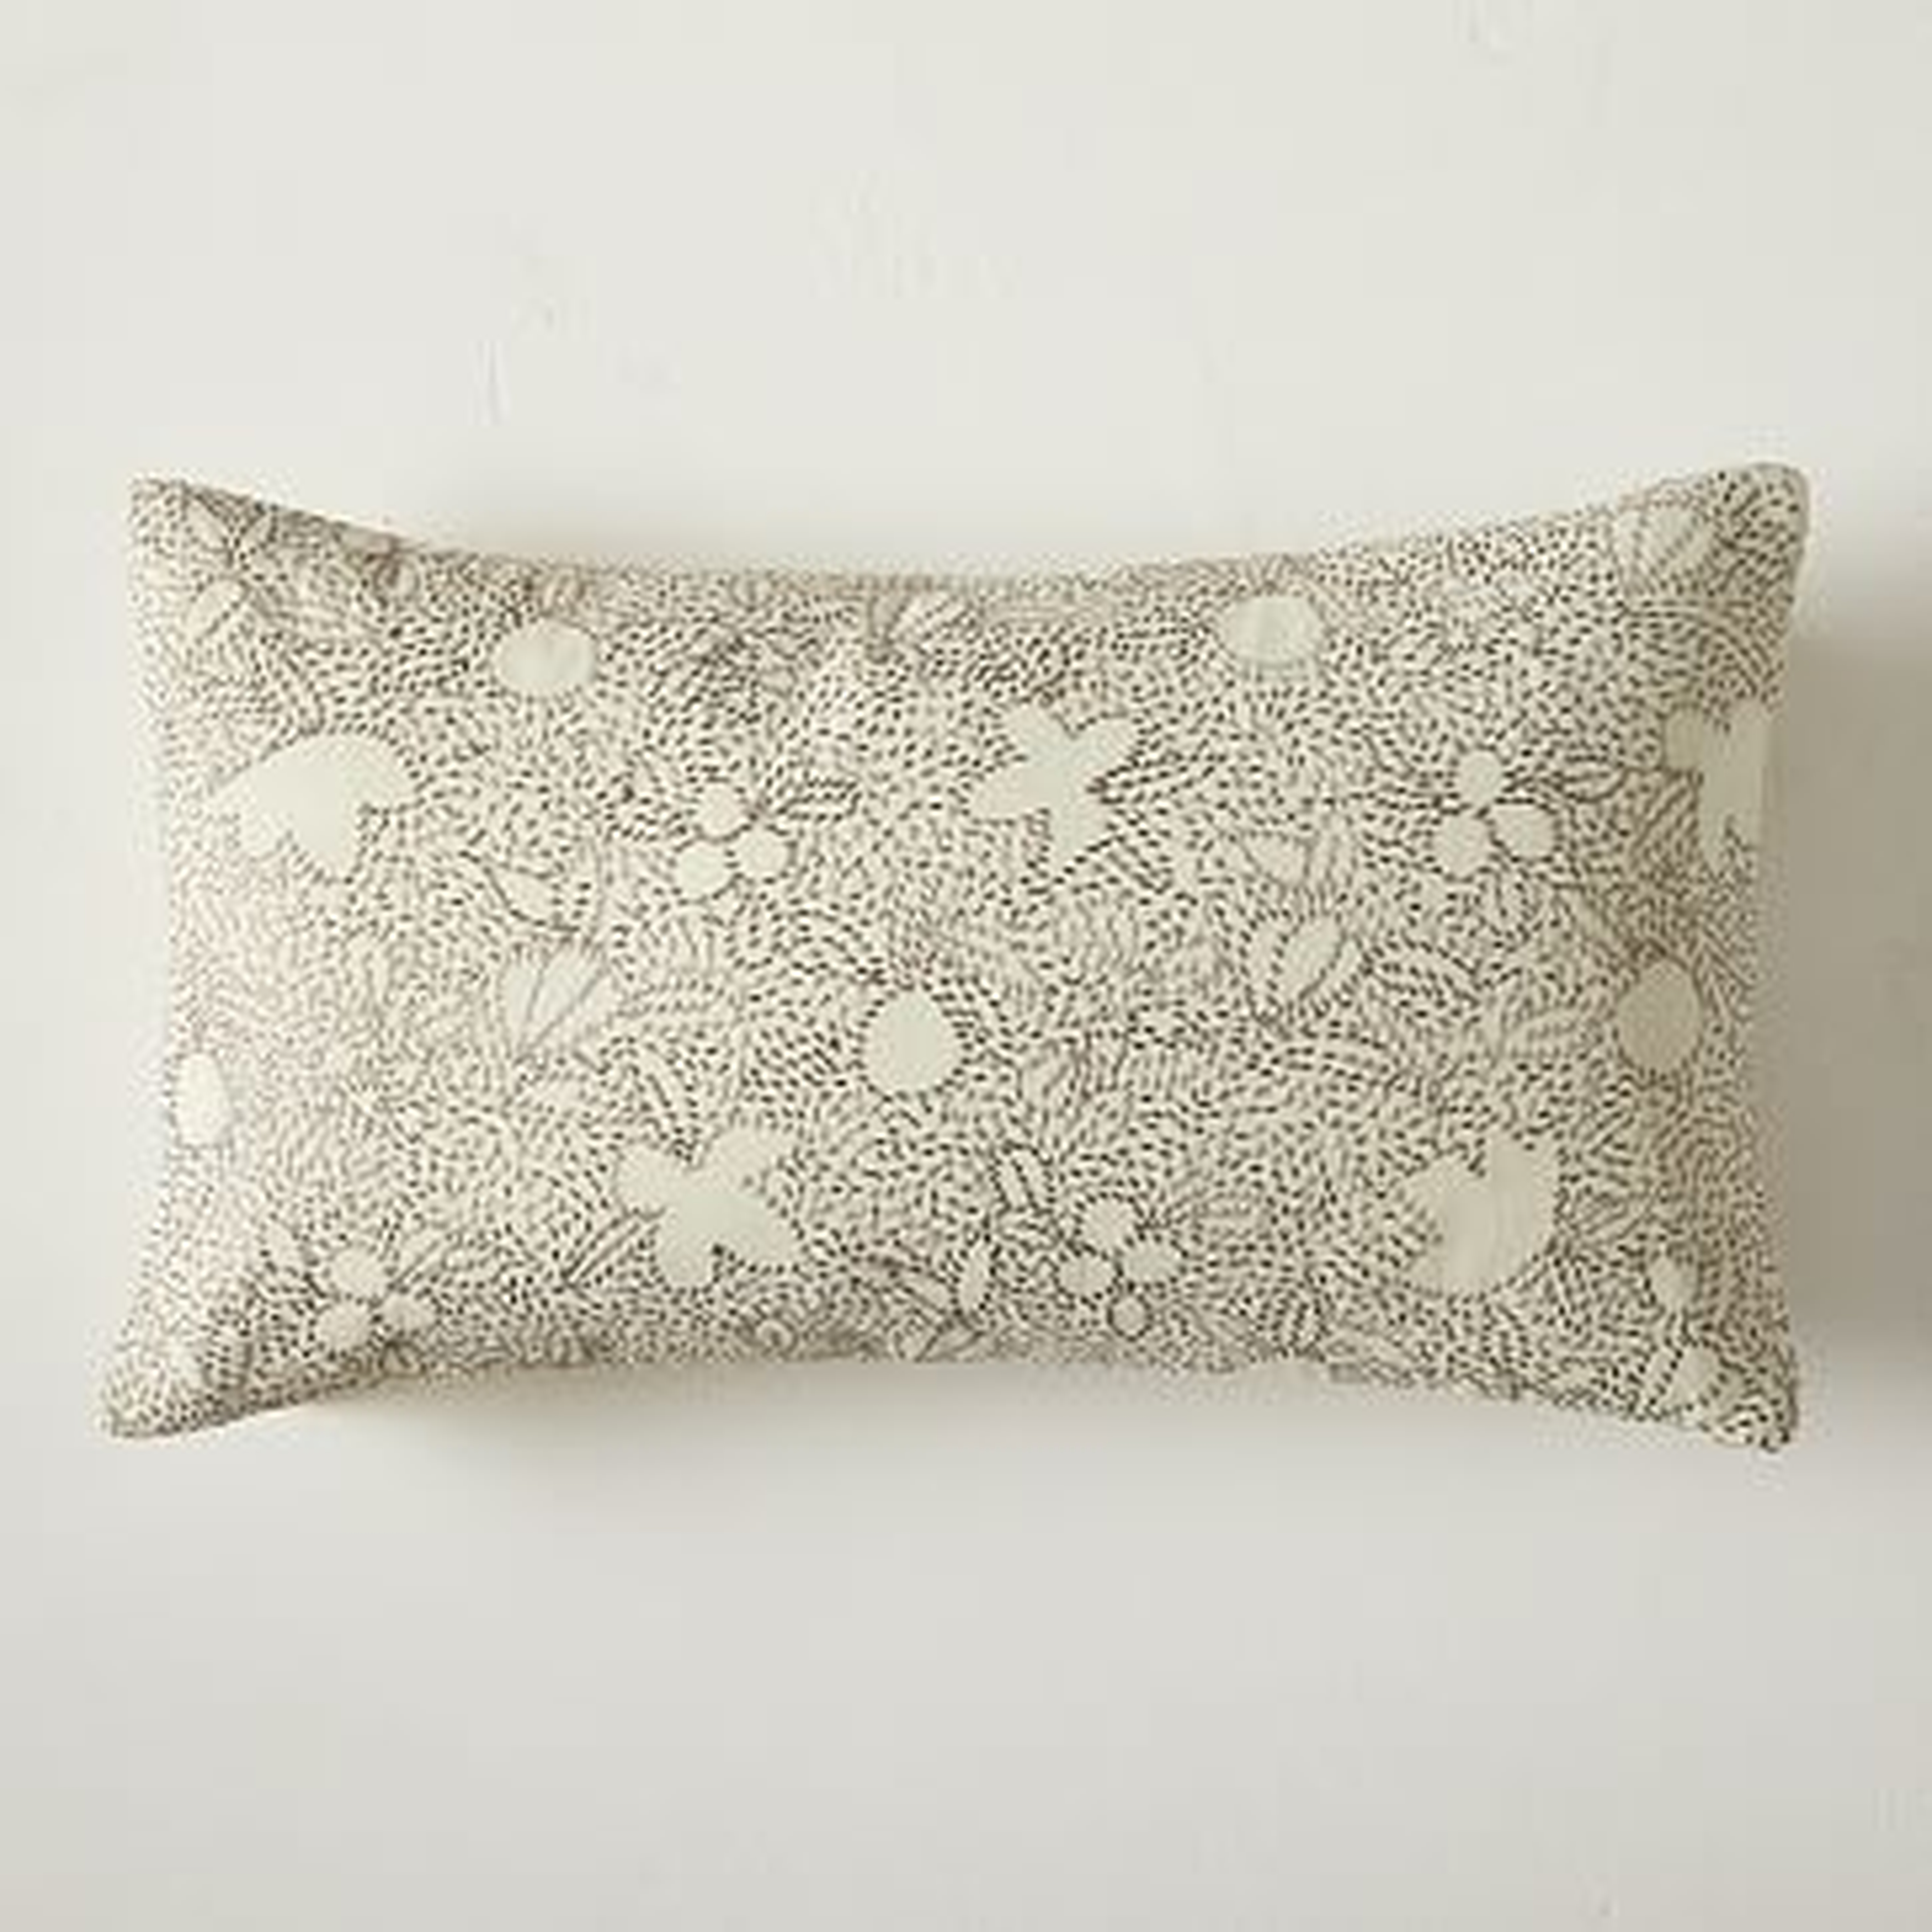 Embroidered Vintage Floral Pillow Cover, White, 21" x 12" - West Elm